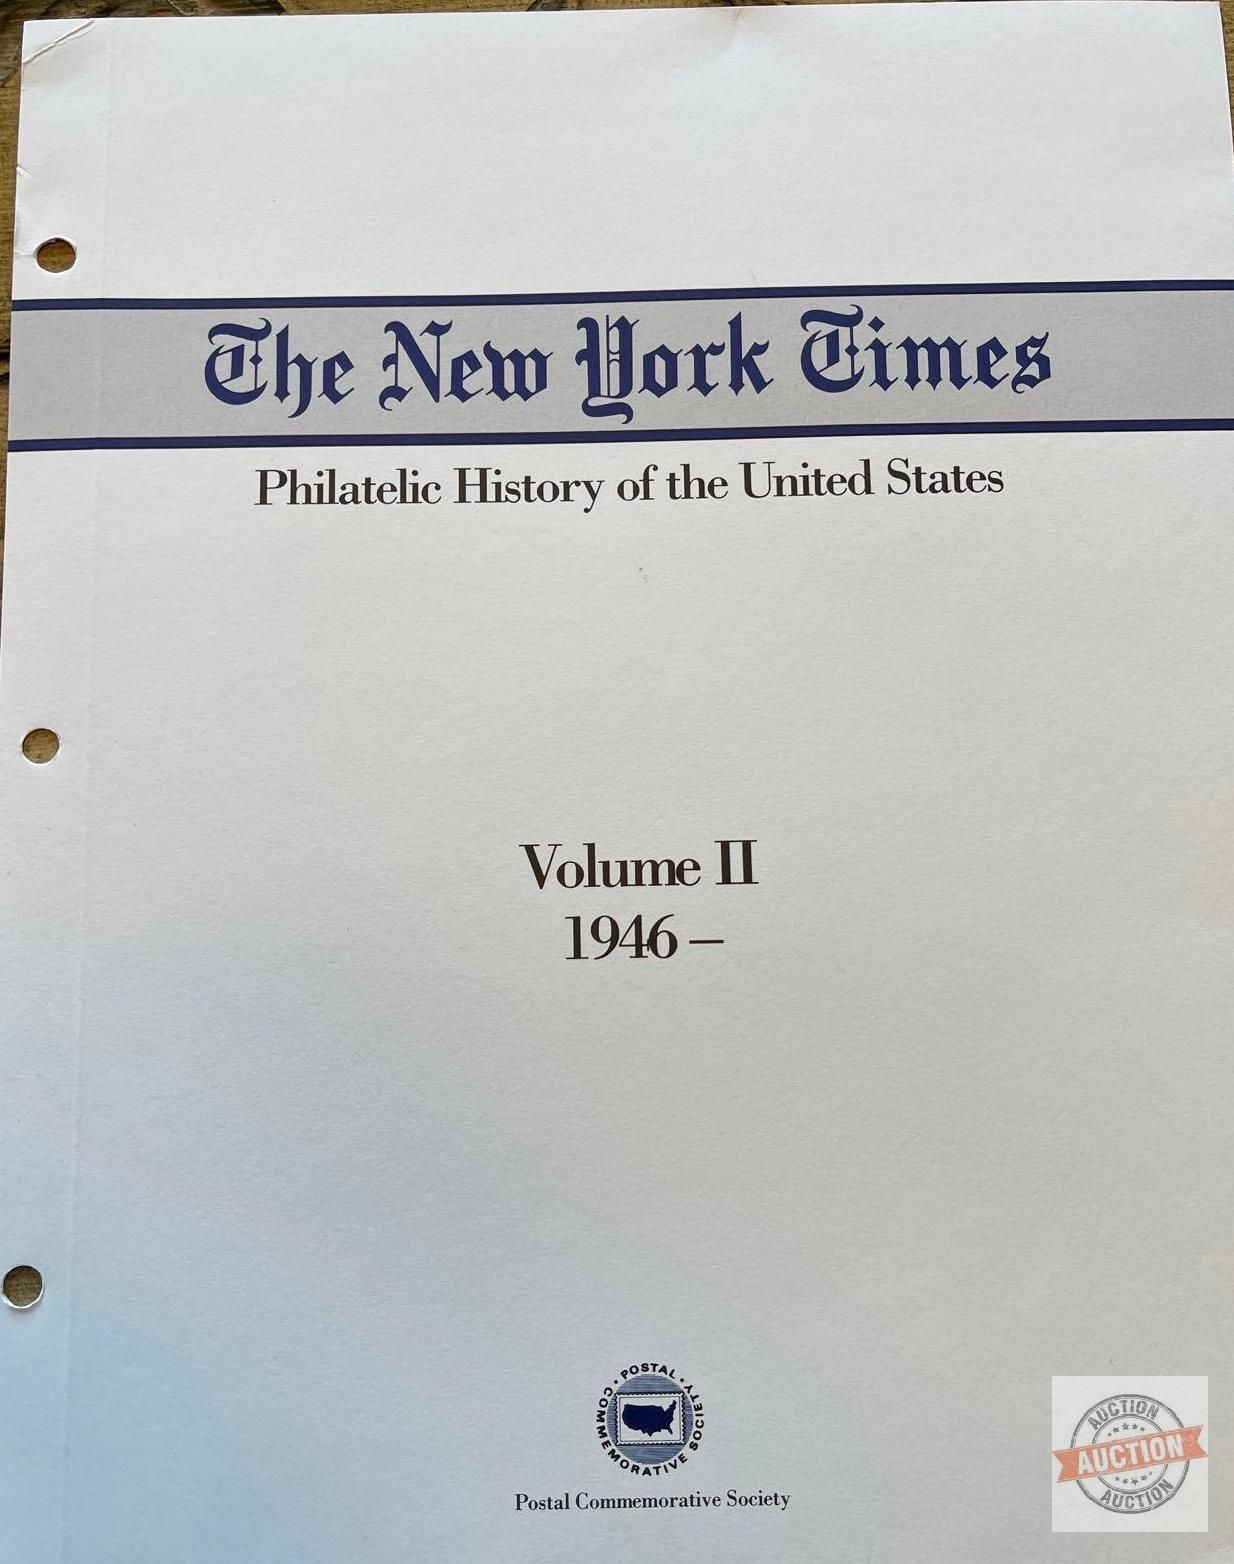 Stamps - The New York Times Philatelic History of the United States, Volume II